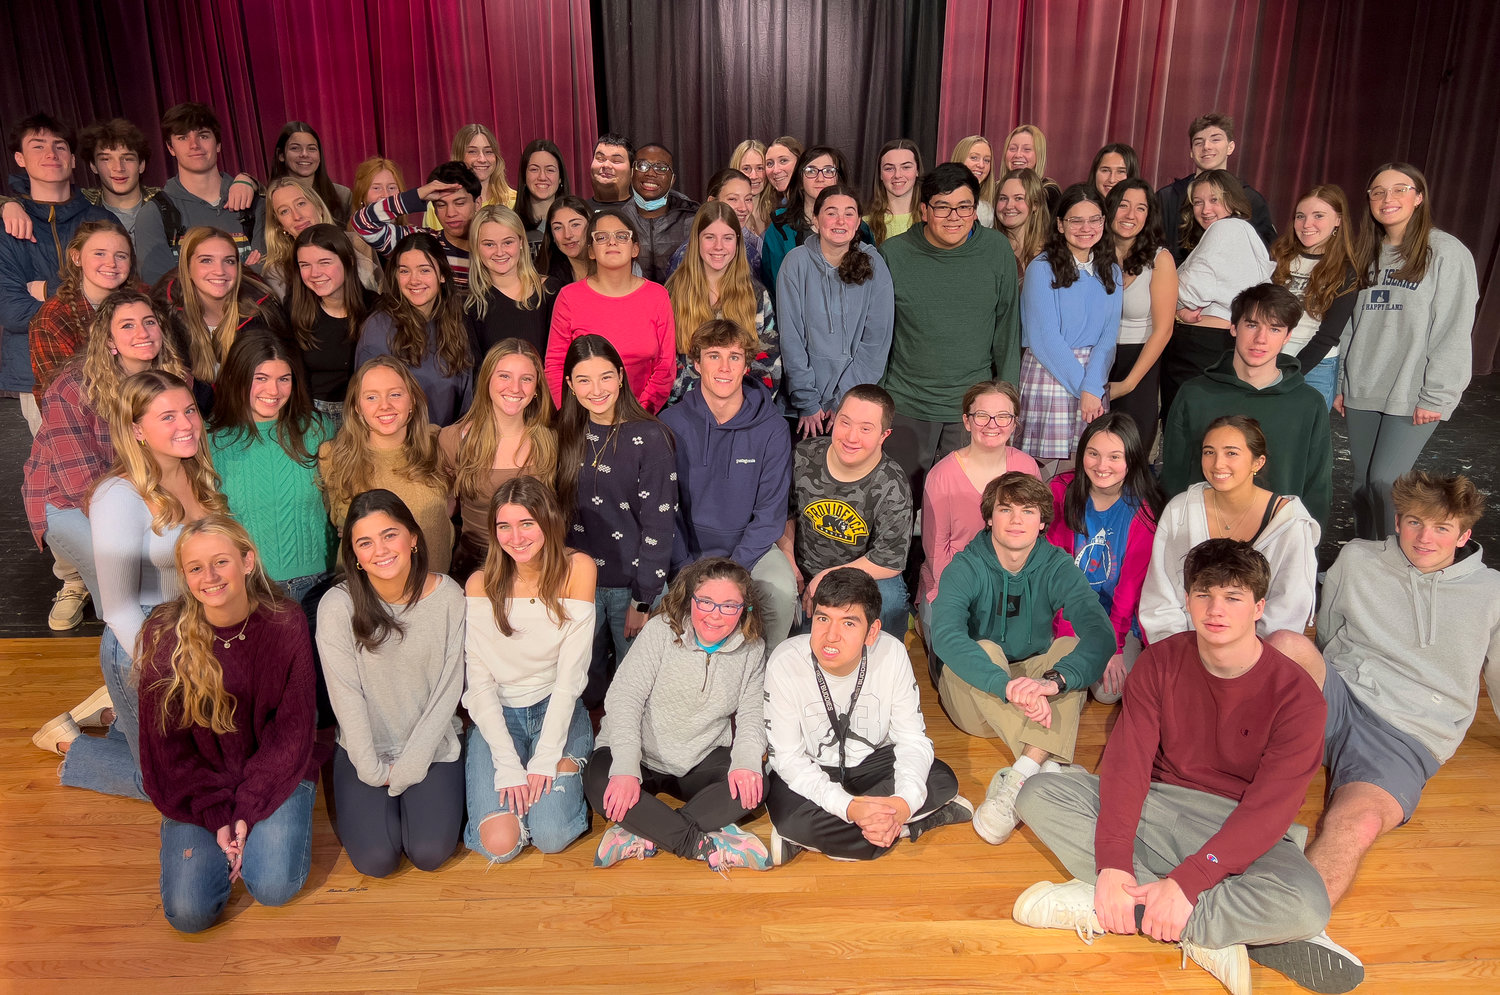 Barrington High School’s Unified Theater program will present “Twisted Tales” on Feb. 10.